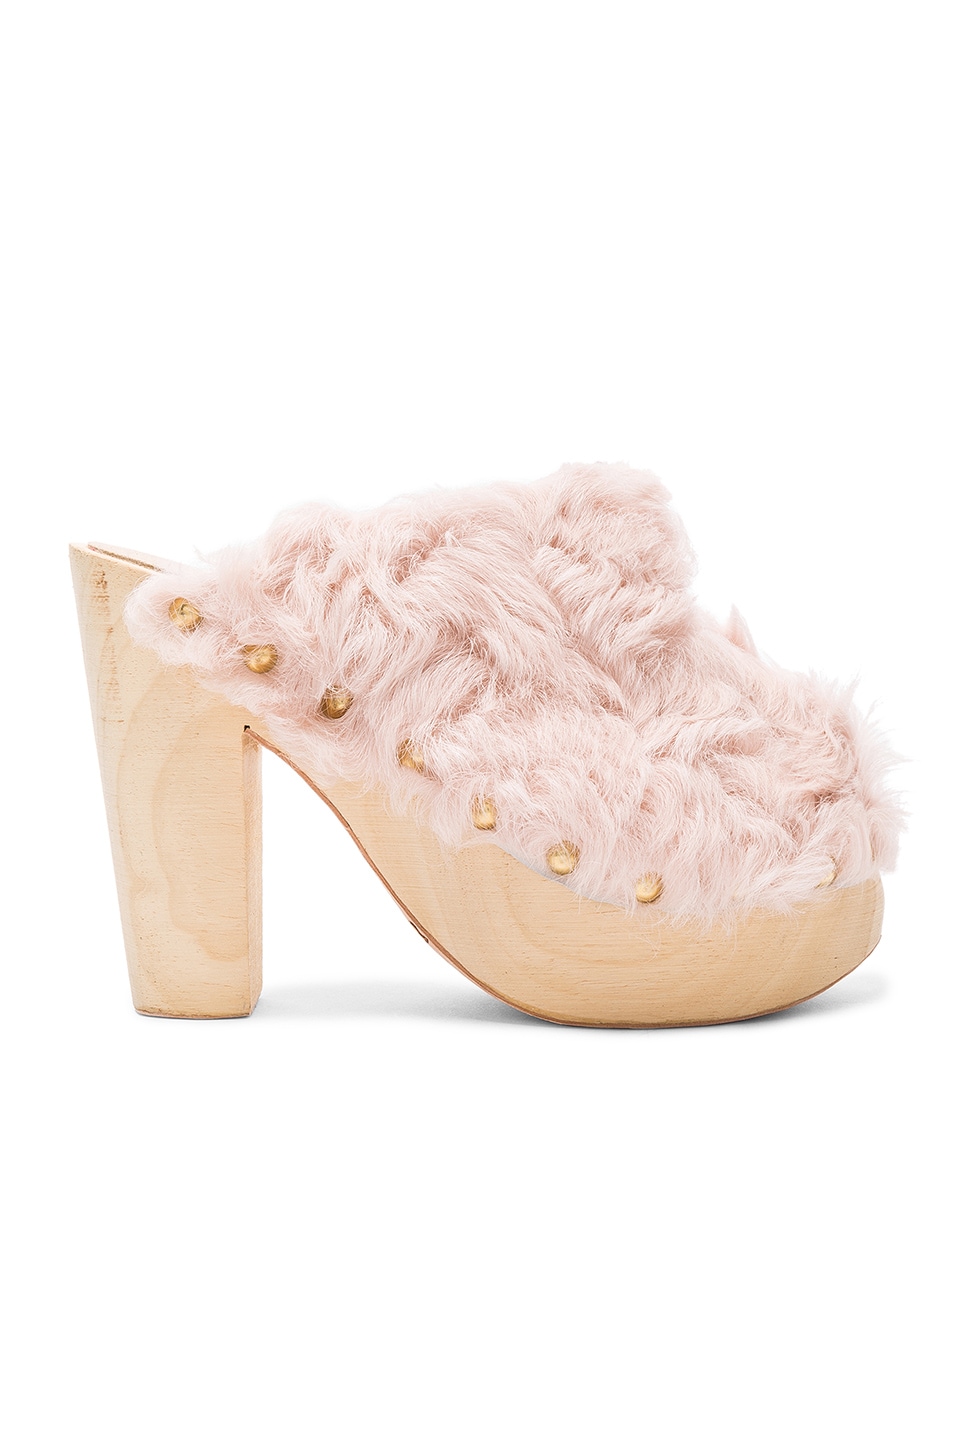 Image 1 of Brother Vellies for FWRD Curly Rabbit Fur Clogs in Light Pink